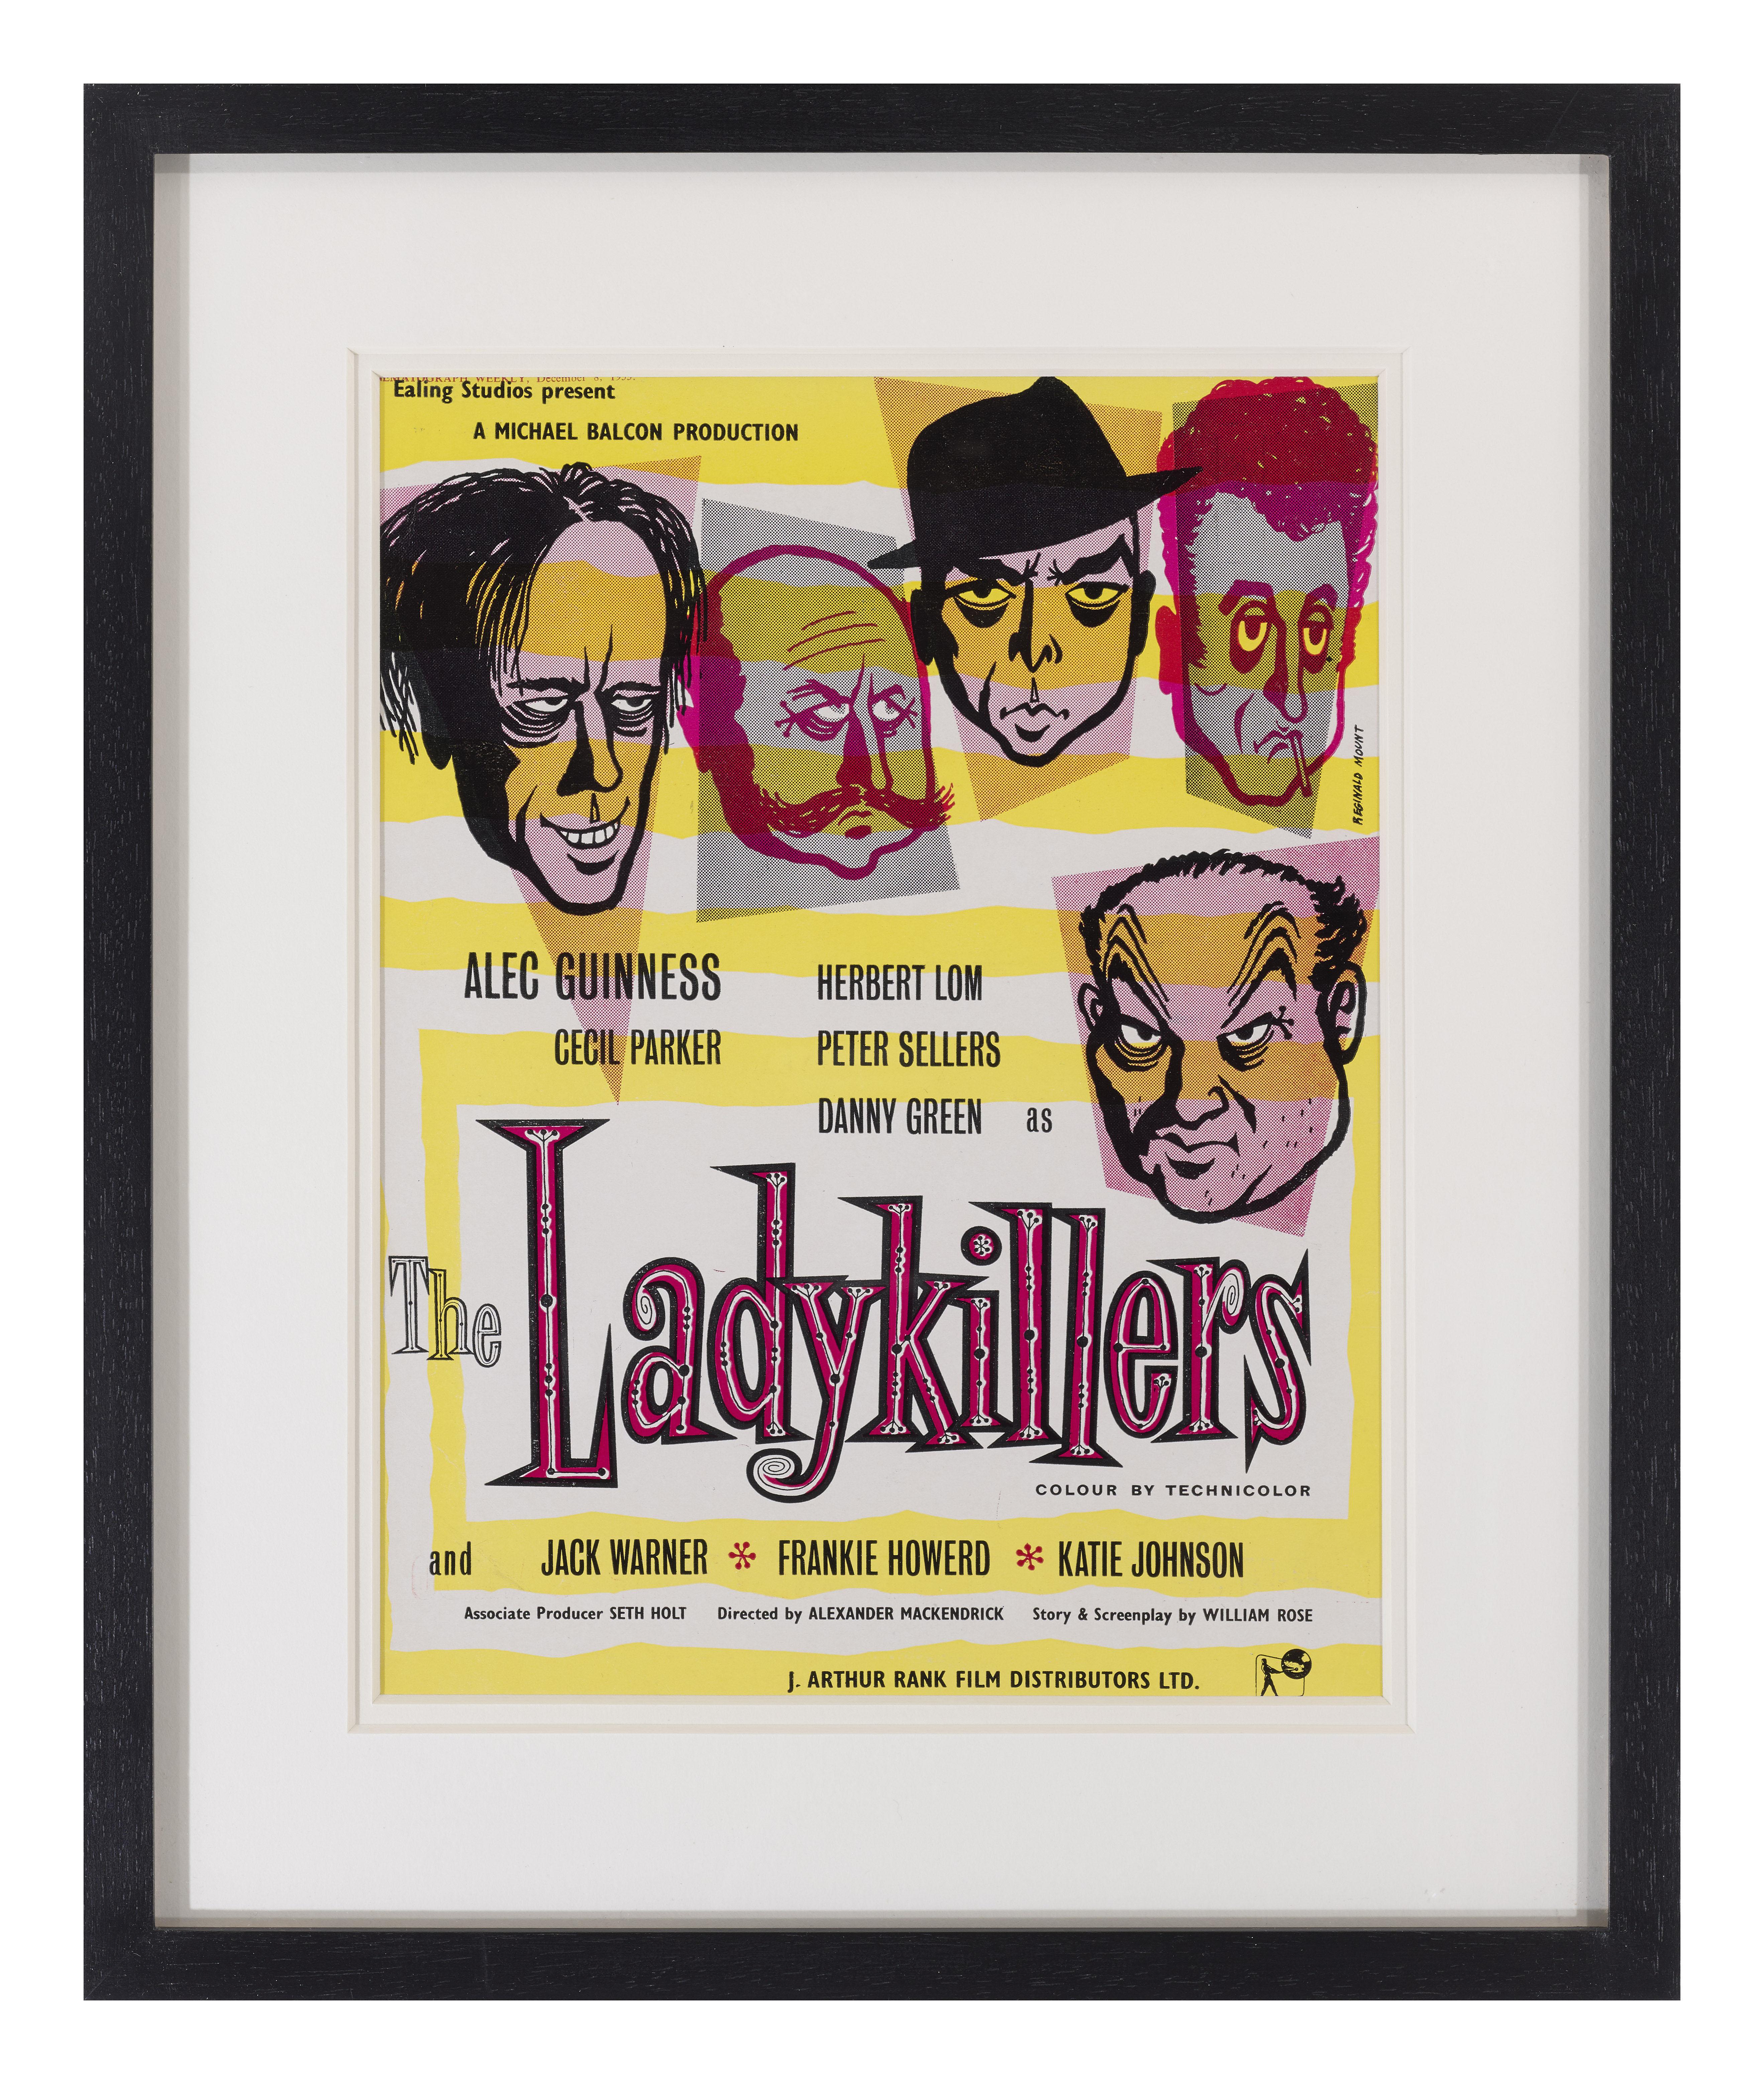 British Ladykillers For Sale